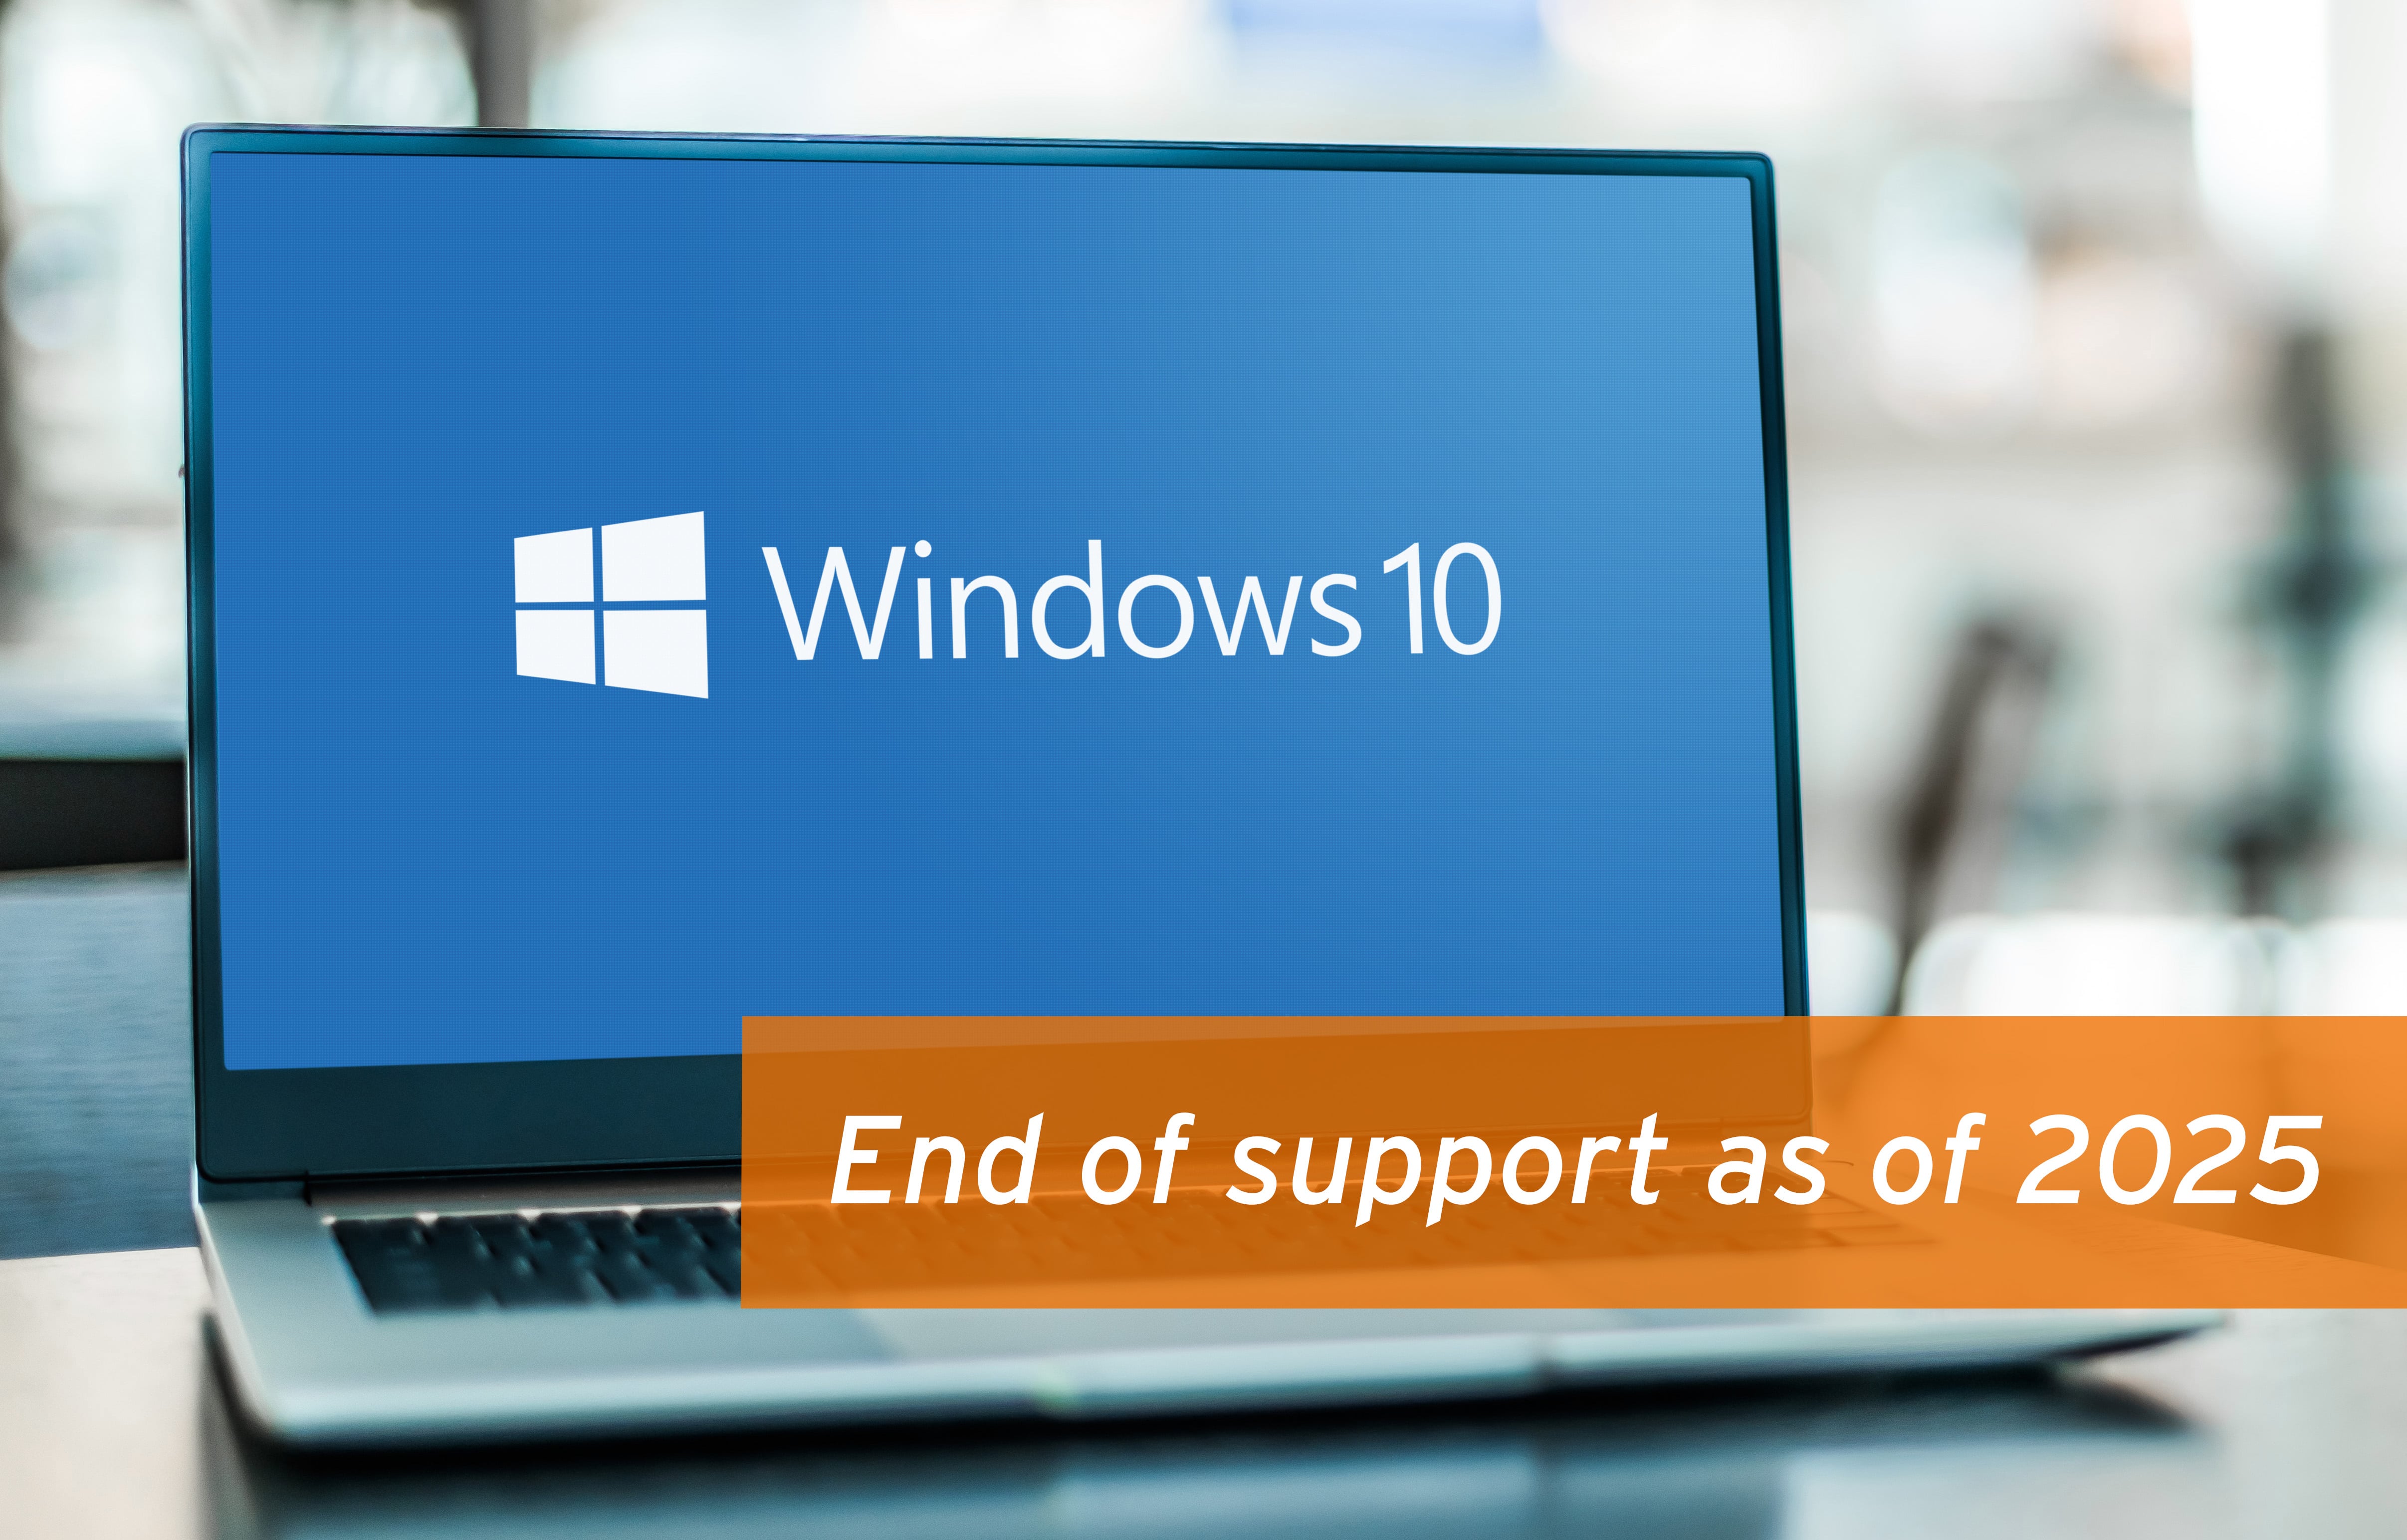 Microsoft will end support in October 2025